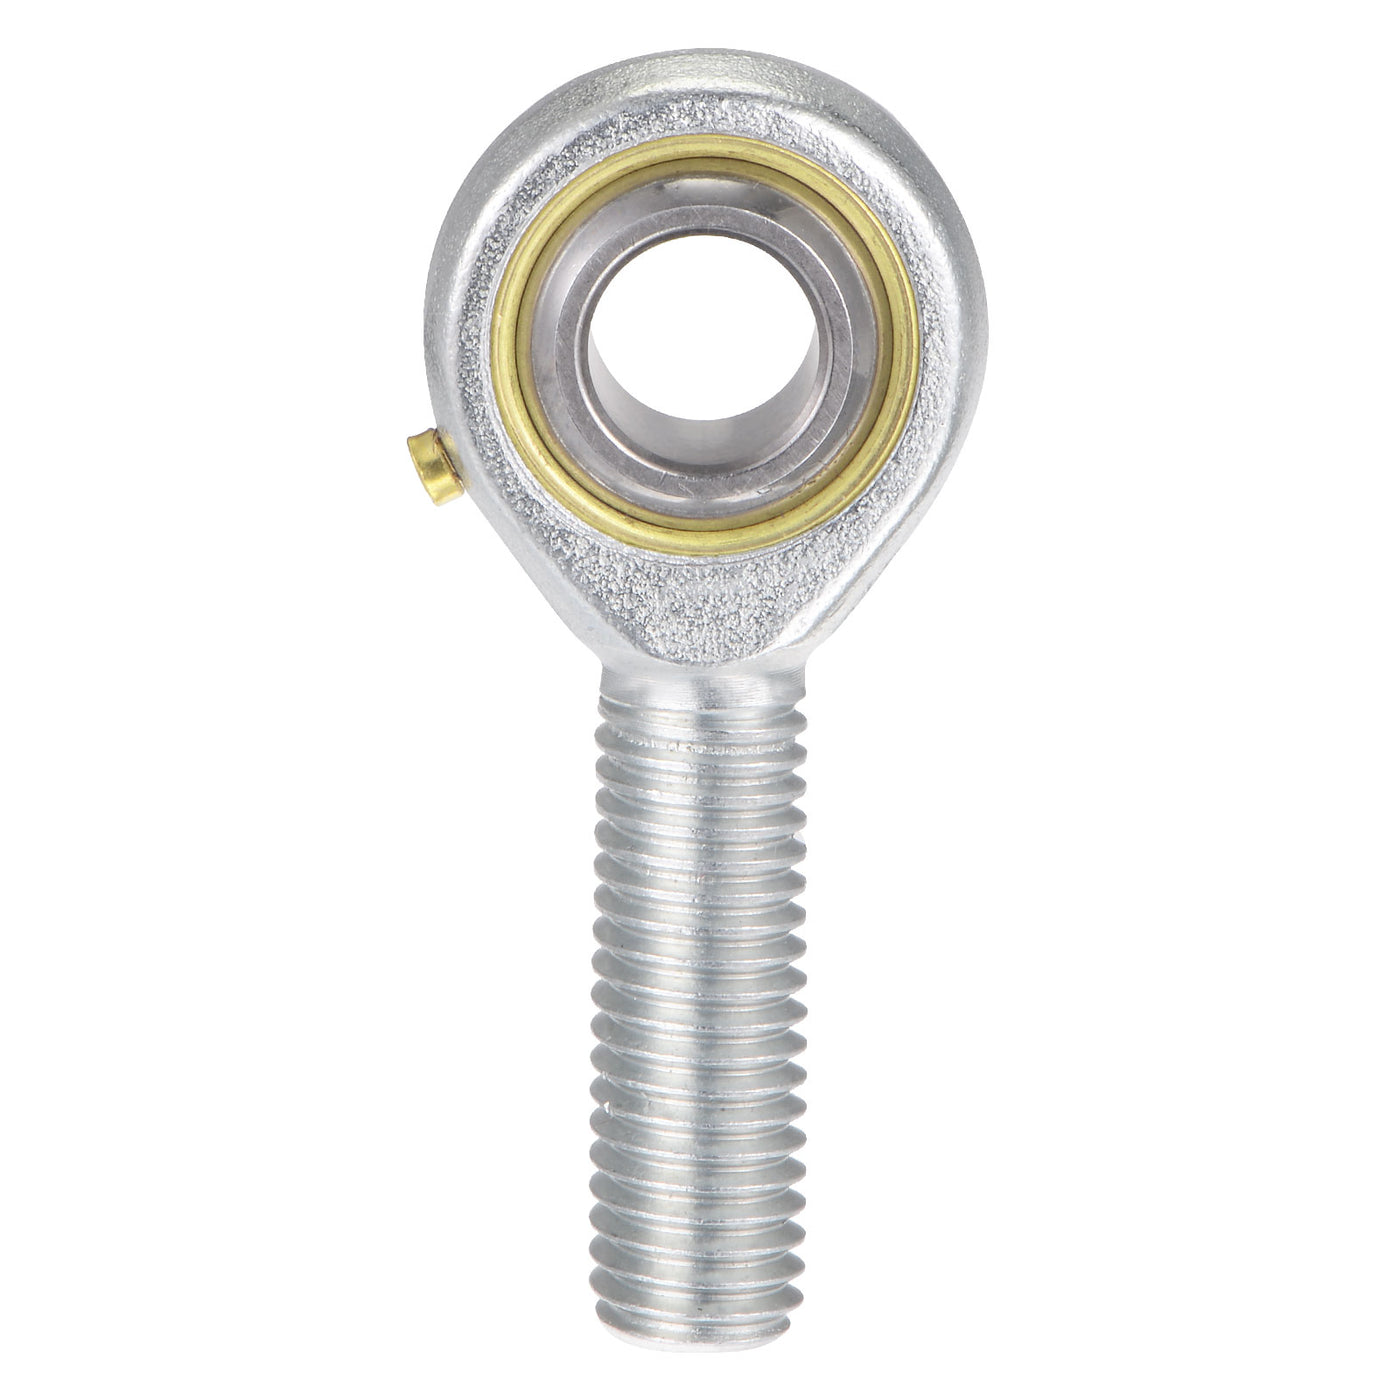 uxcell Uxcell Rod End Bearing Self-lubricated Joint Bearing Left Hand Male Thread Connector